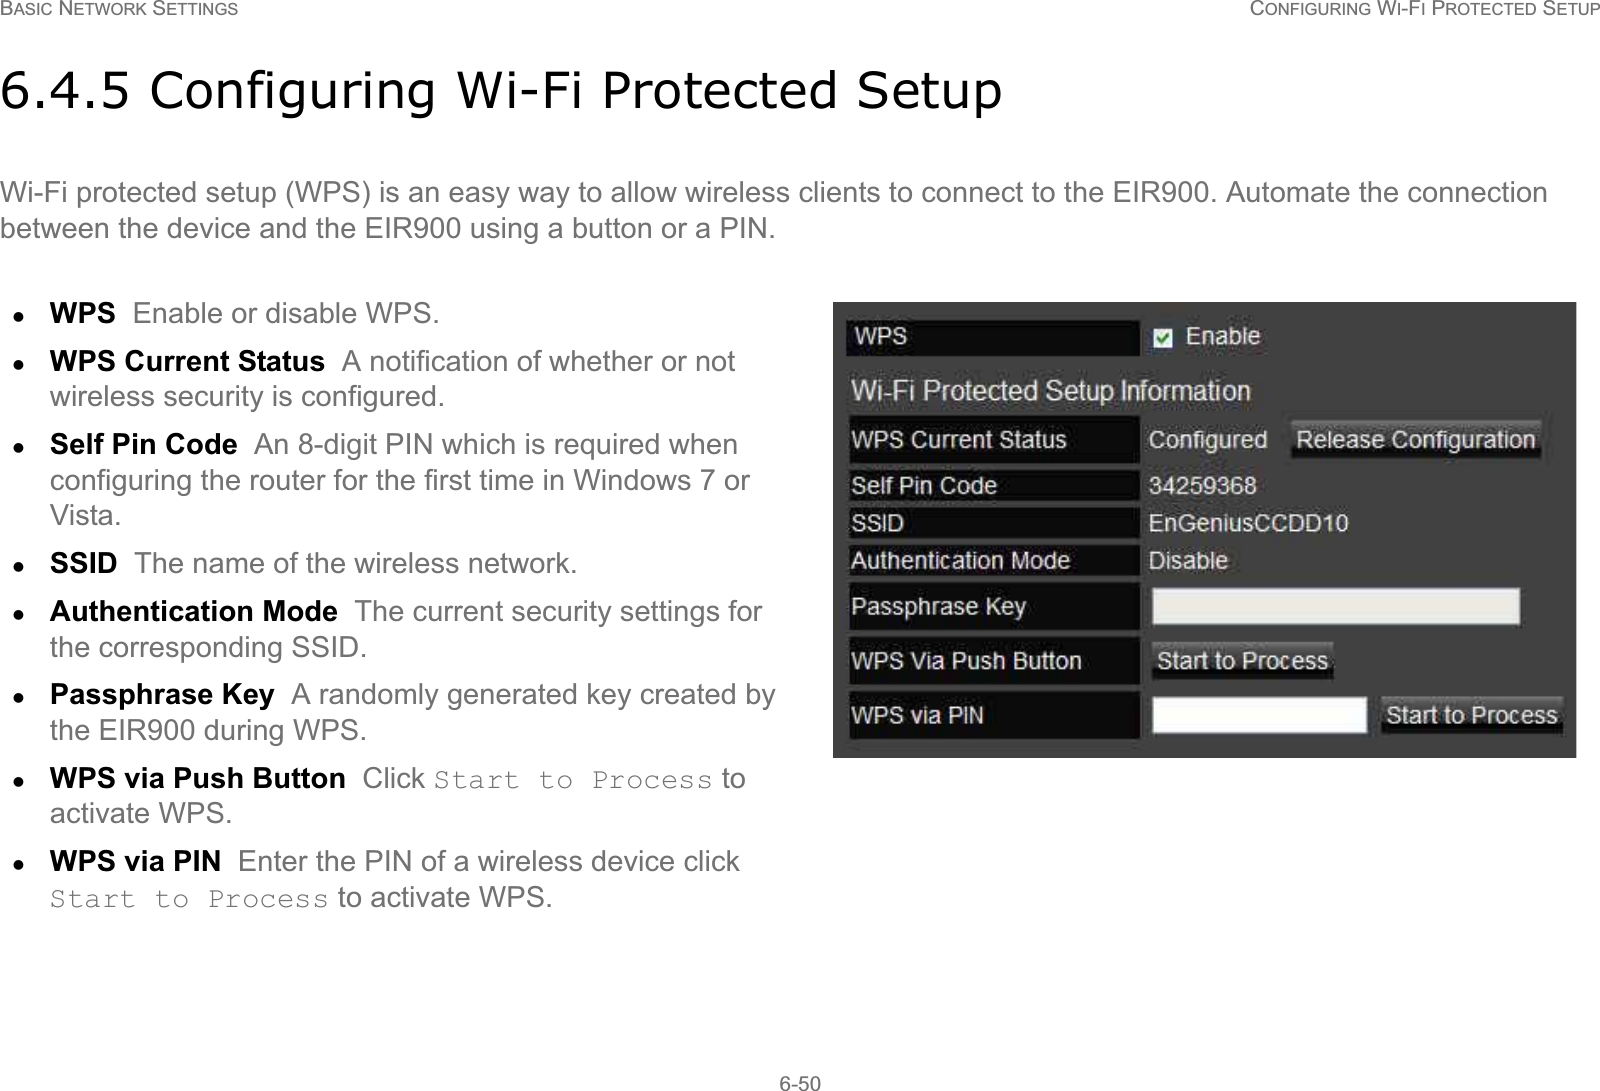 BASIC NETWORK SETTINGS CONFIGURING WI-FI PROTECTED SETUP6-506.4.5 Configuring Wi-Fi Protected SetupWi-Fi protected setup (WPS) is an easy way to allow wireless clients to connect to the EIR900. Automate the connection between the device and the EIR900 using a button or a PIN.zWPS  Enable or disable WPS.zWPS Current Status  A notification of whether or not wireless security is configured.zSelf Pin Code  An 8-digit PIN which is required when configuring the router for the first time in Windows 7 or Vista.zSSID  The name of the wireless network.zAuthentication Mode  The current security settings for the corresponding SSID.zPassphrase Key  A randomly generated key created by the EIR900 during WPS.zWPS via Push Button  Click Start to Process to activate WPS.zWPS via PIN  Enter the PIN of a wireless device click Start to Process to activate WPS.